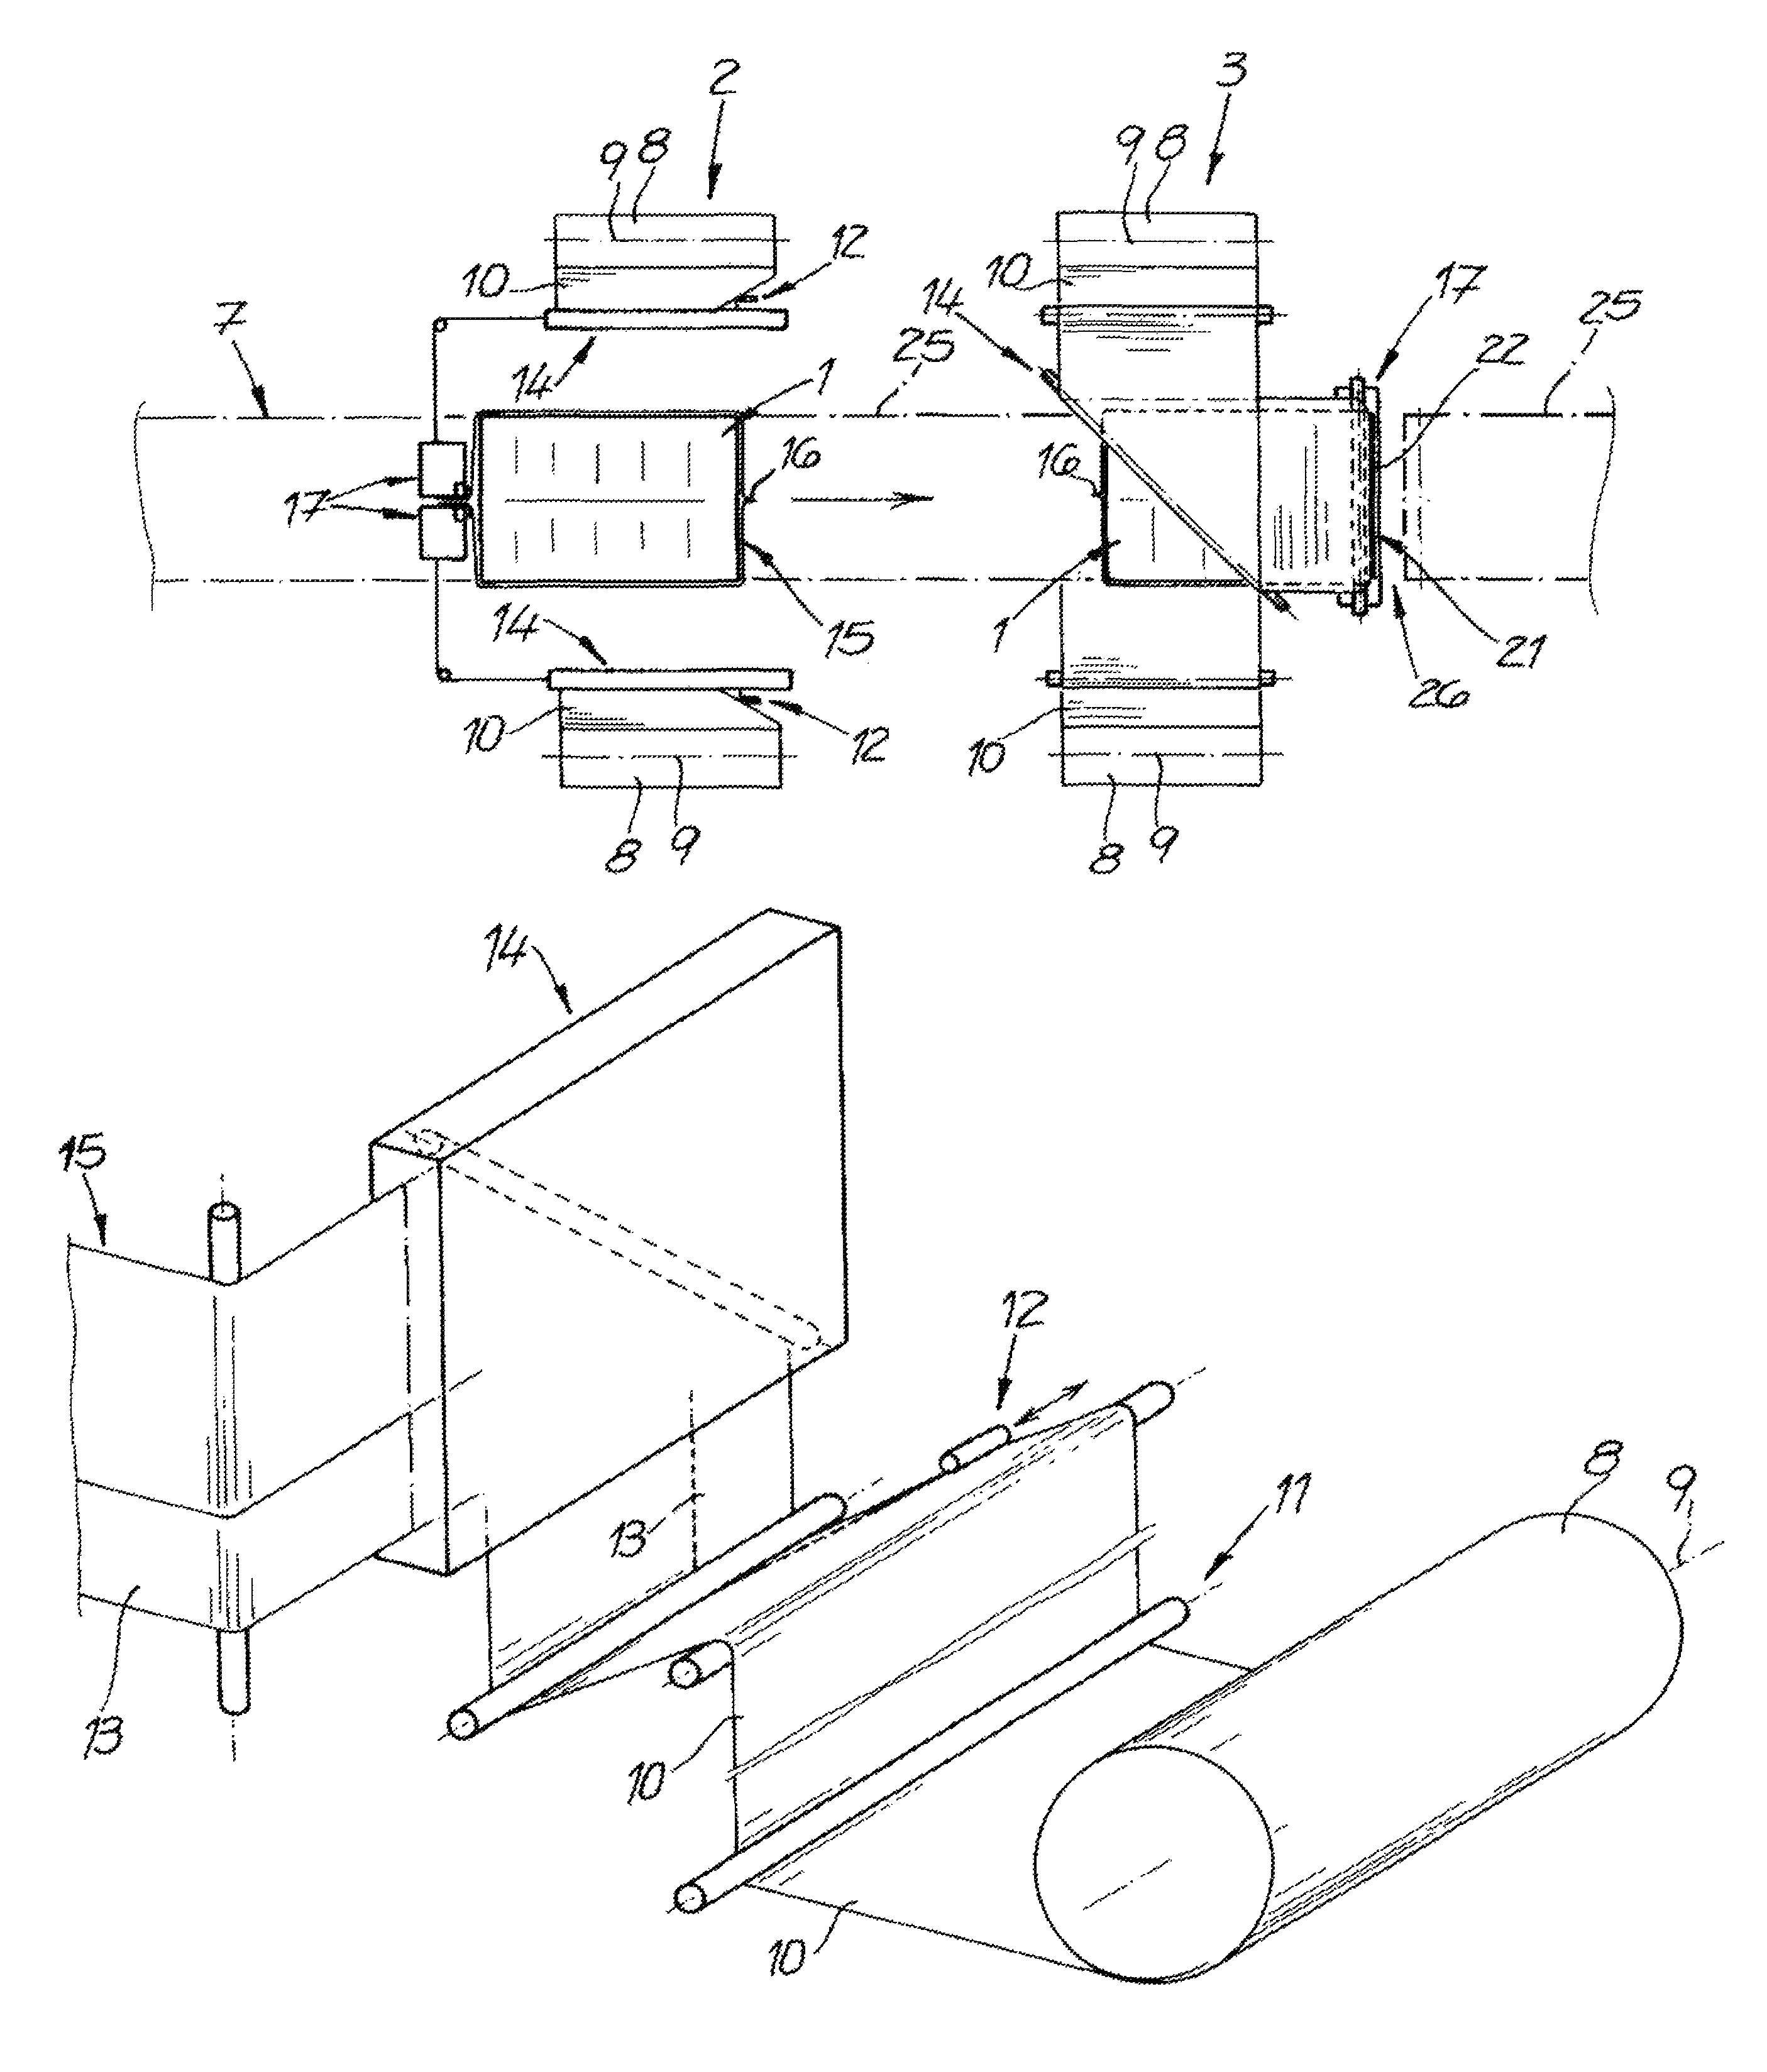 Apparatus for packaging an object in film